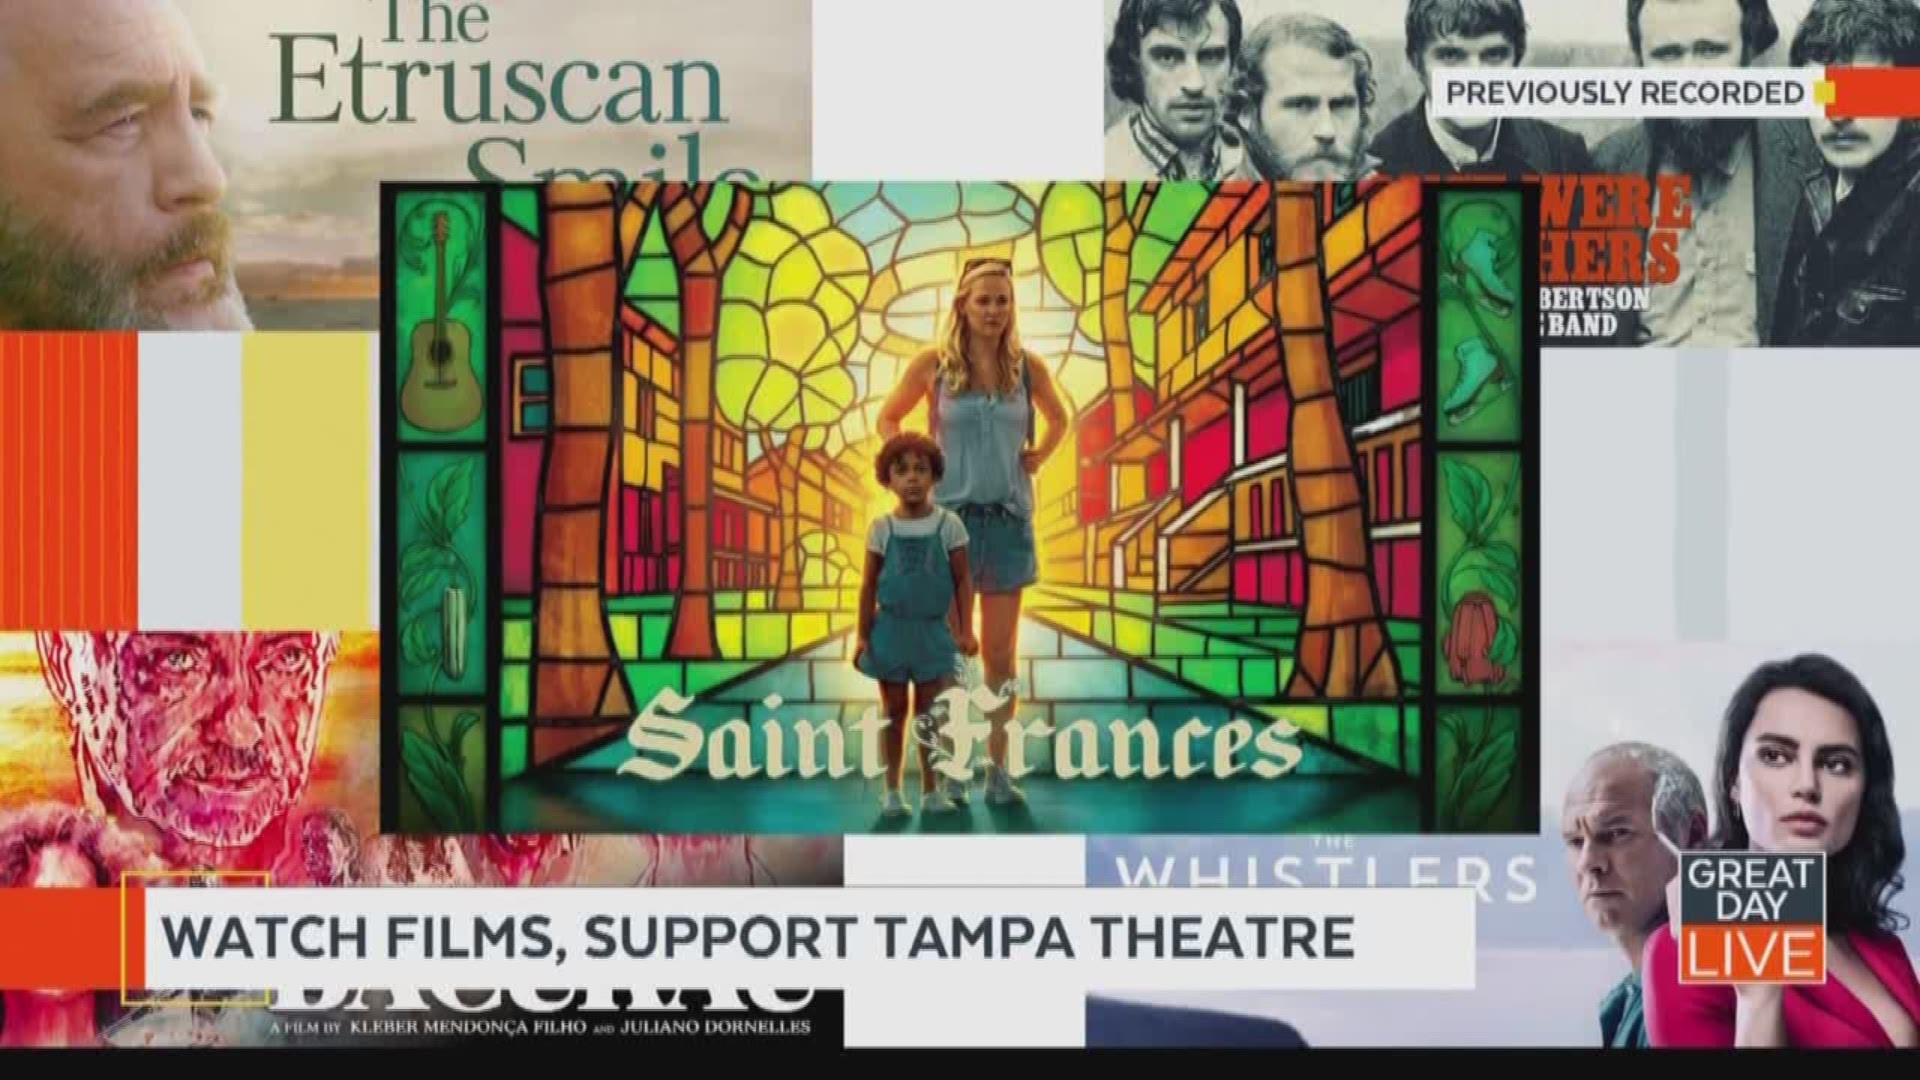 To see a full list of the available films, visit tampatheatre.org.